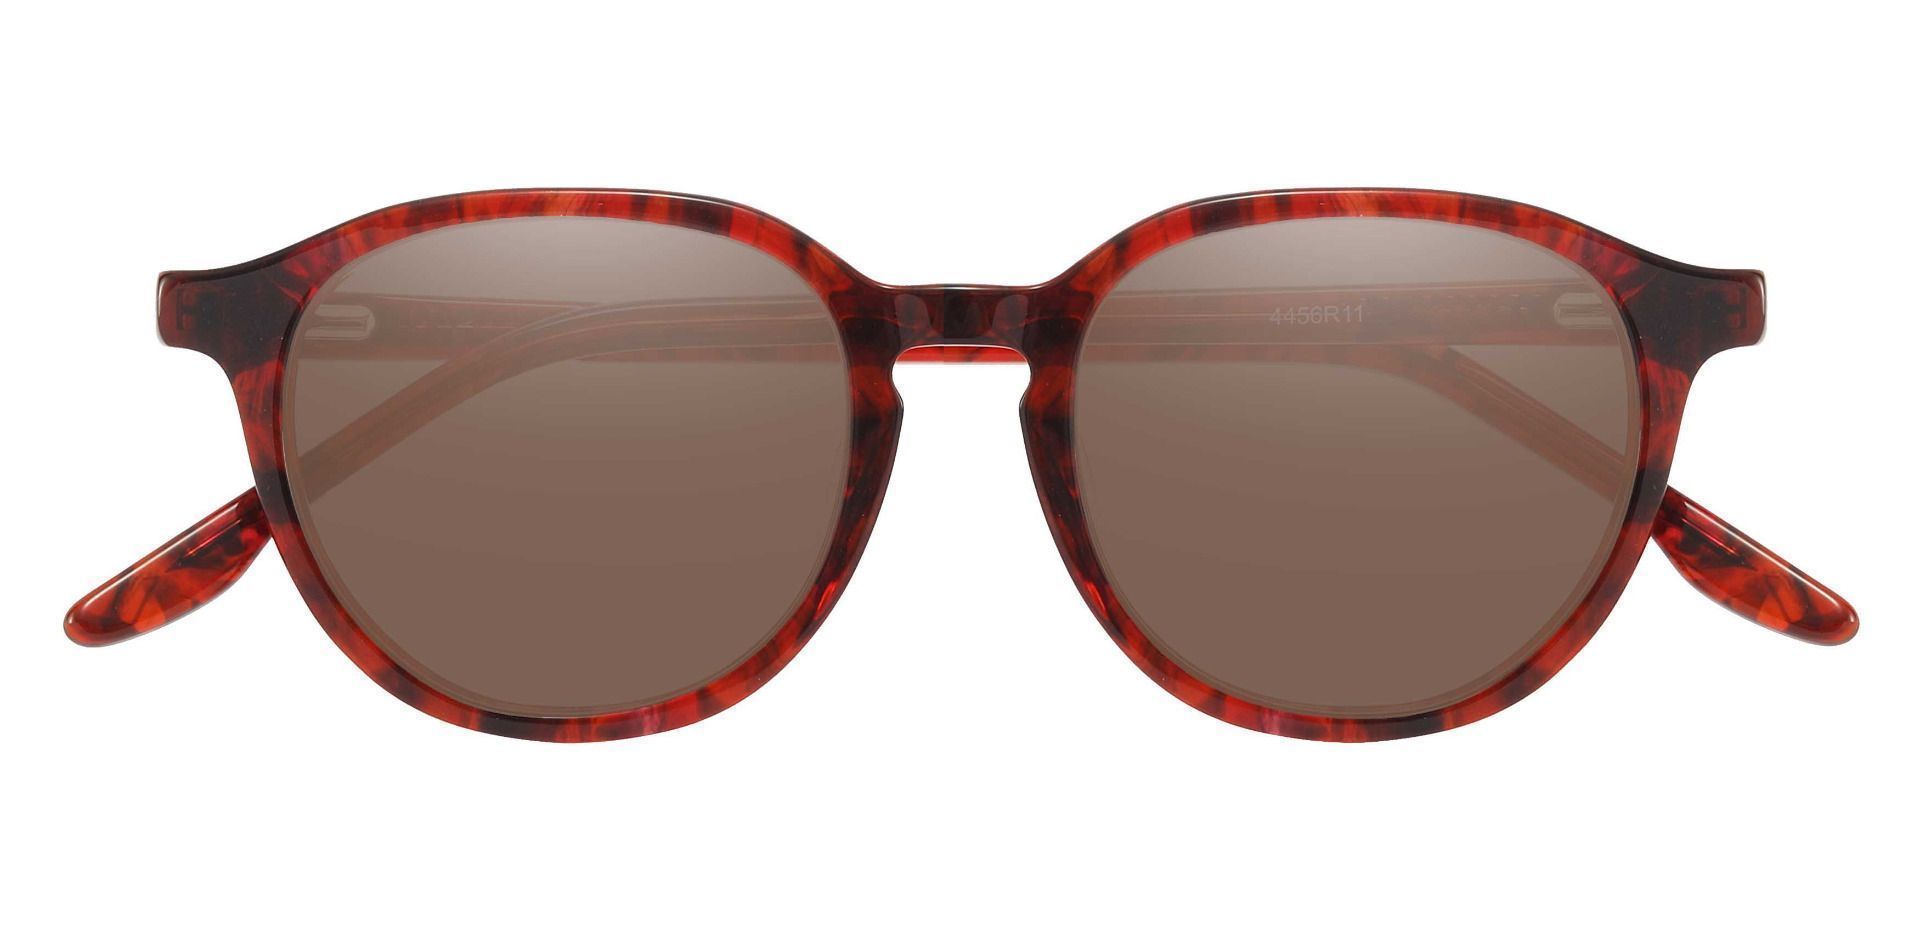 Ashley Oval Prescription Sunglasses - Red Frame With Brown Lenses